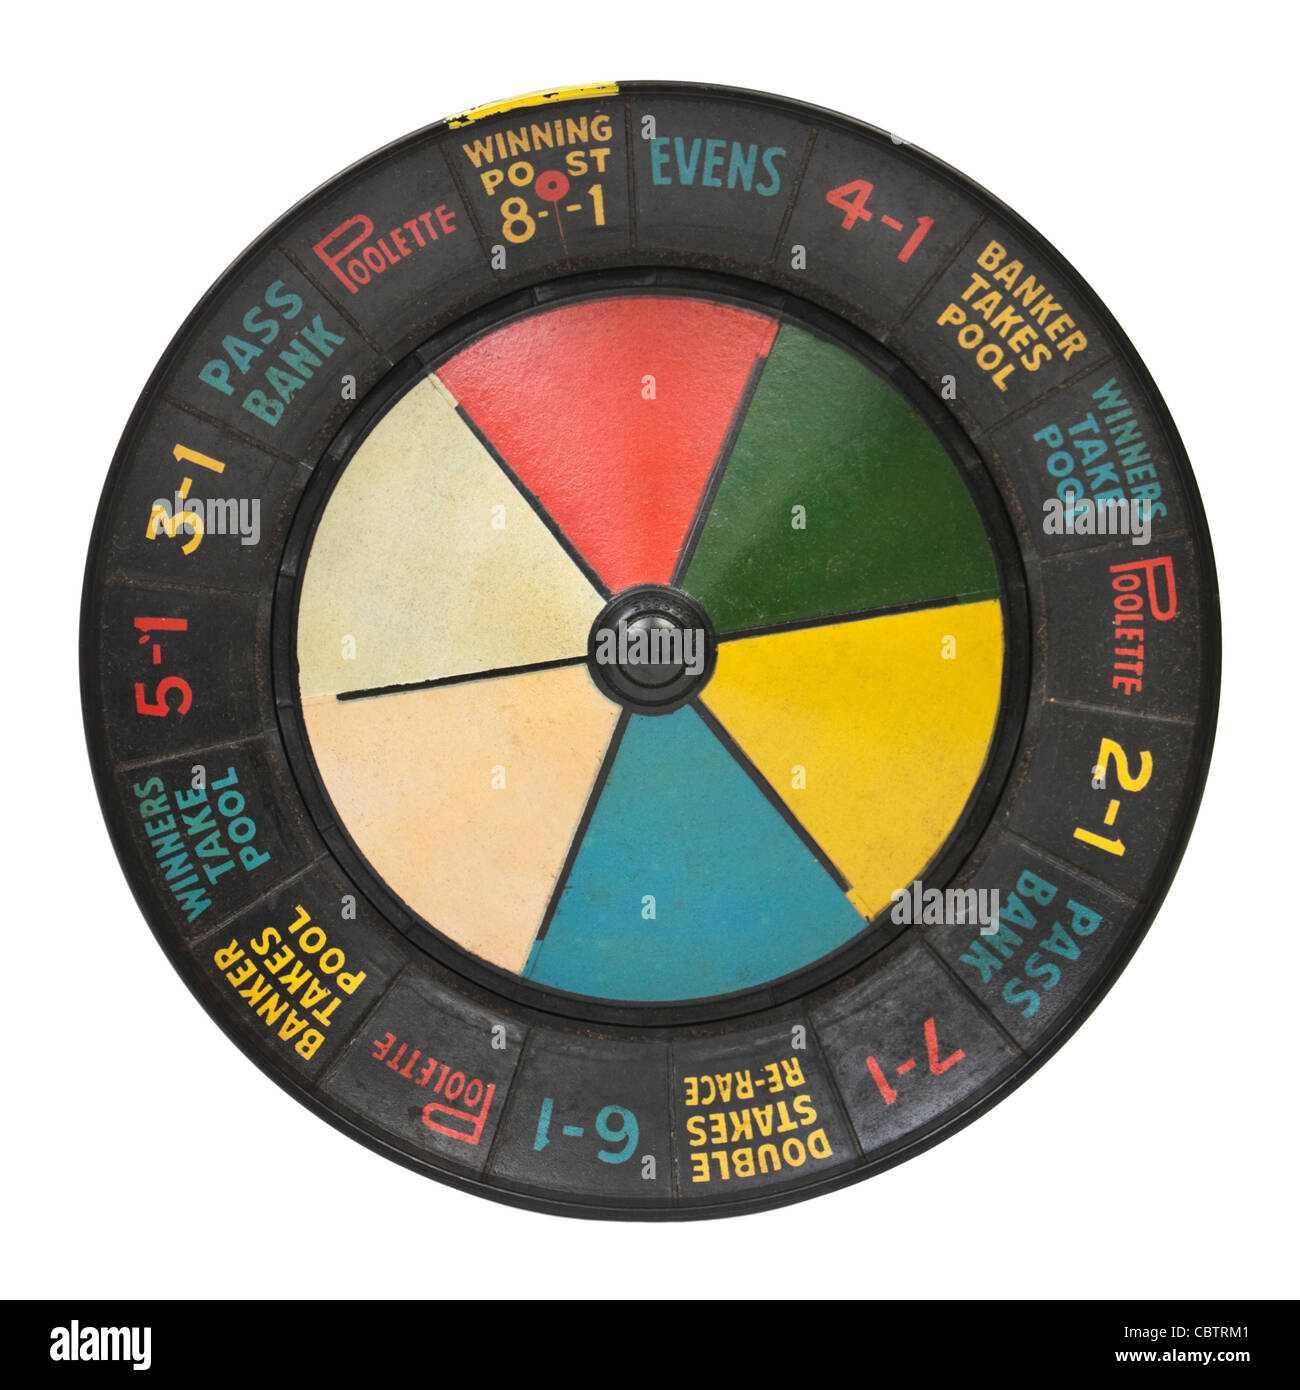 Roulette Wheel Game